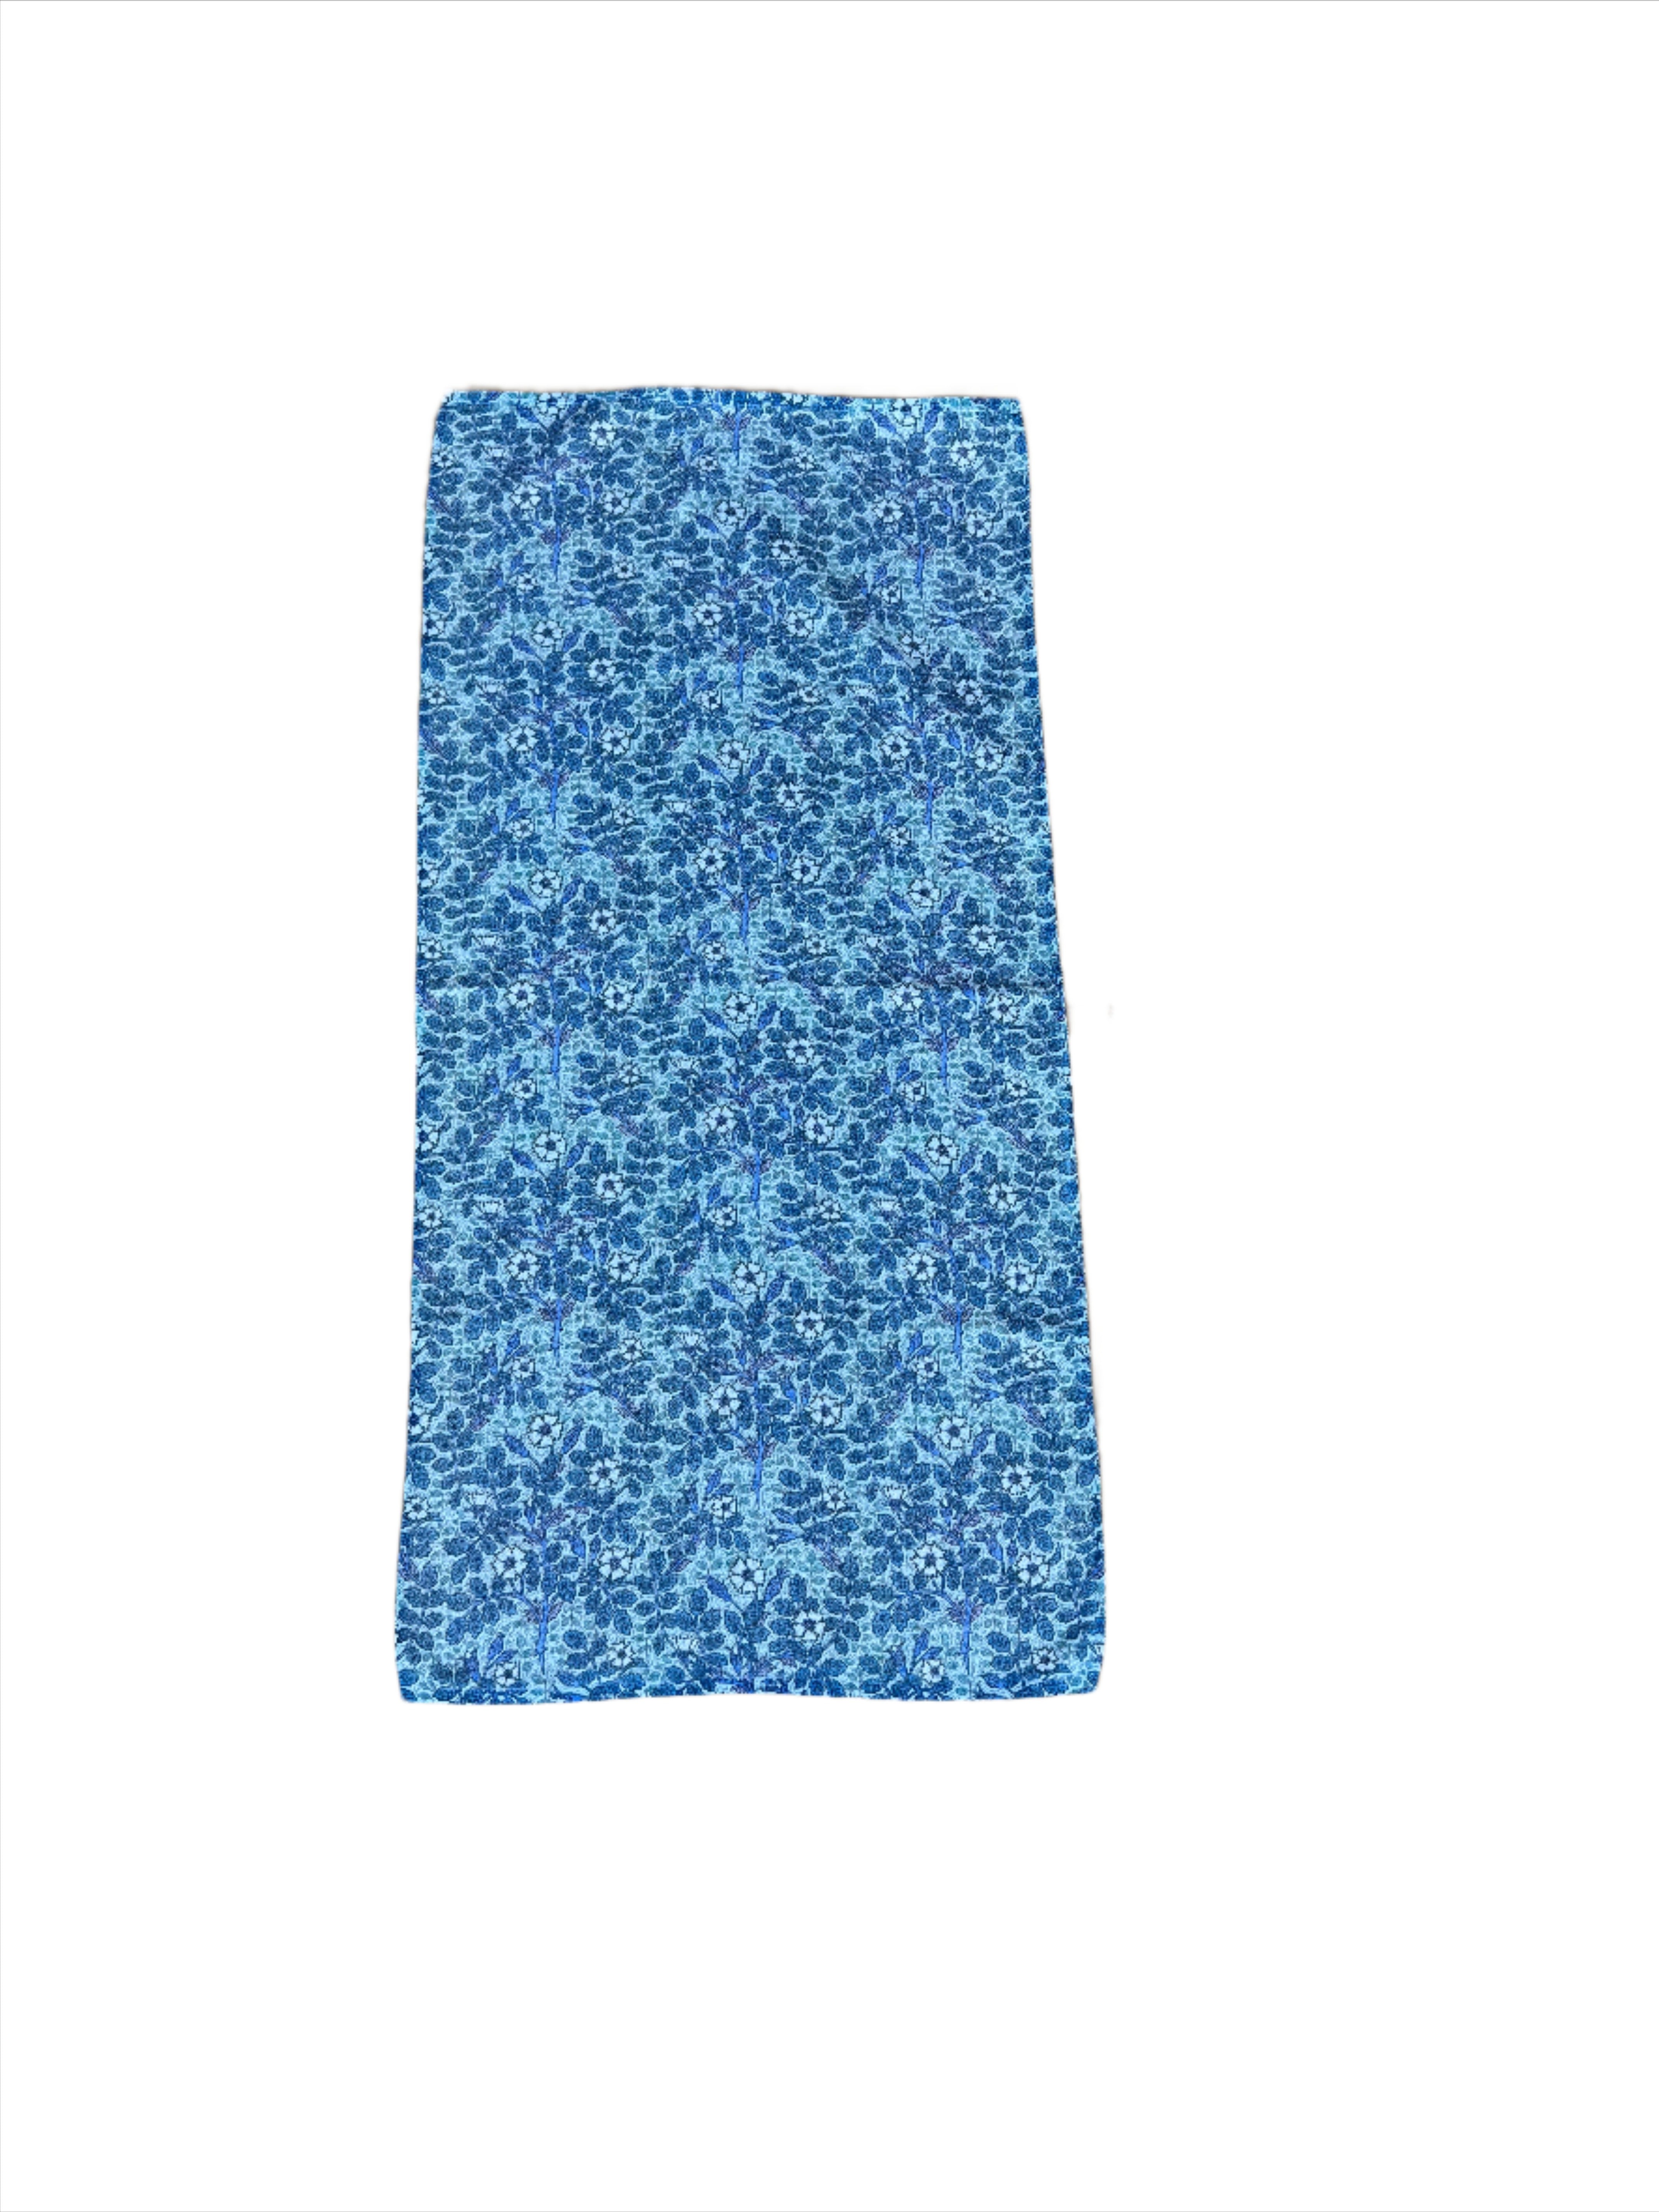 Summer Collection:  All Things Blue Garden Kitchen Towel